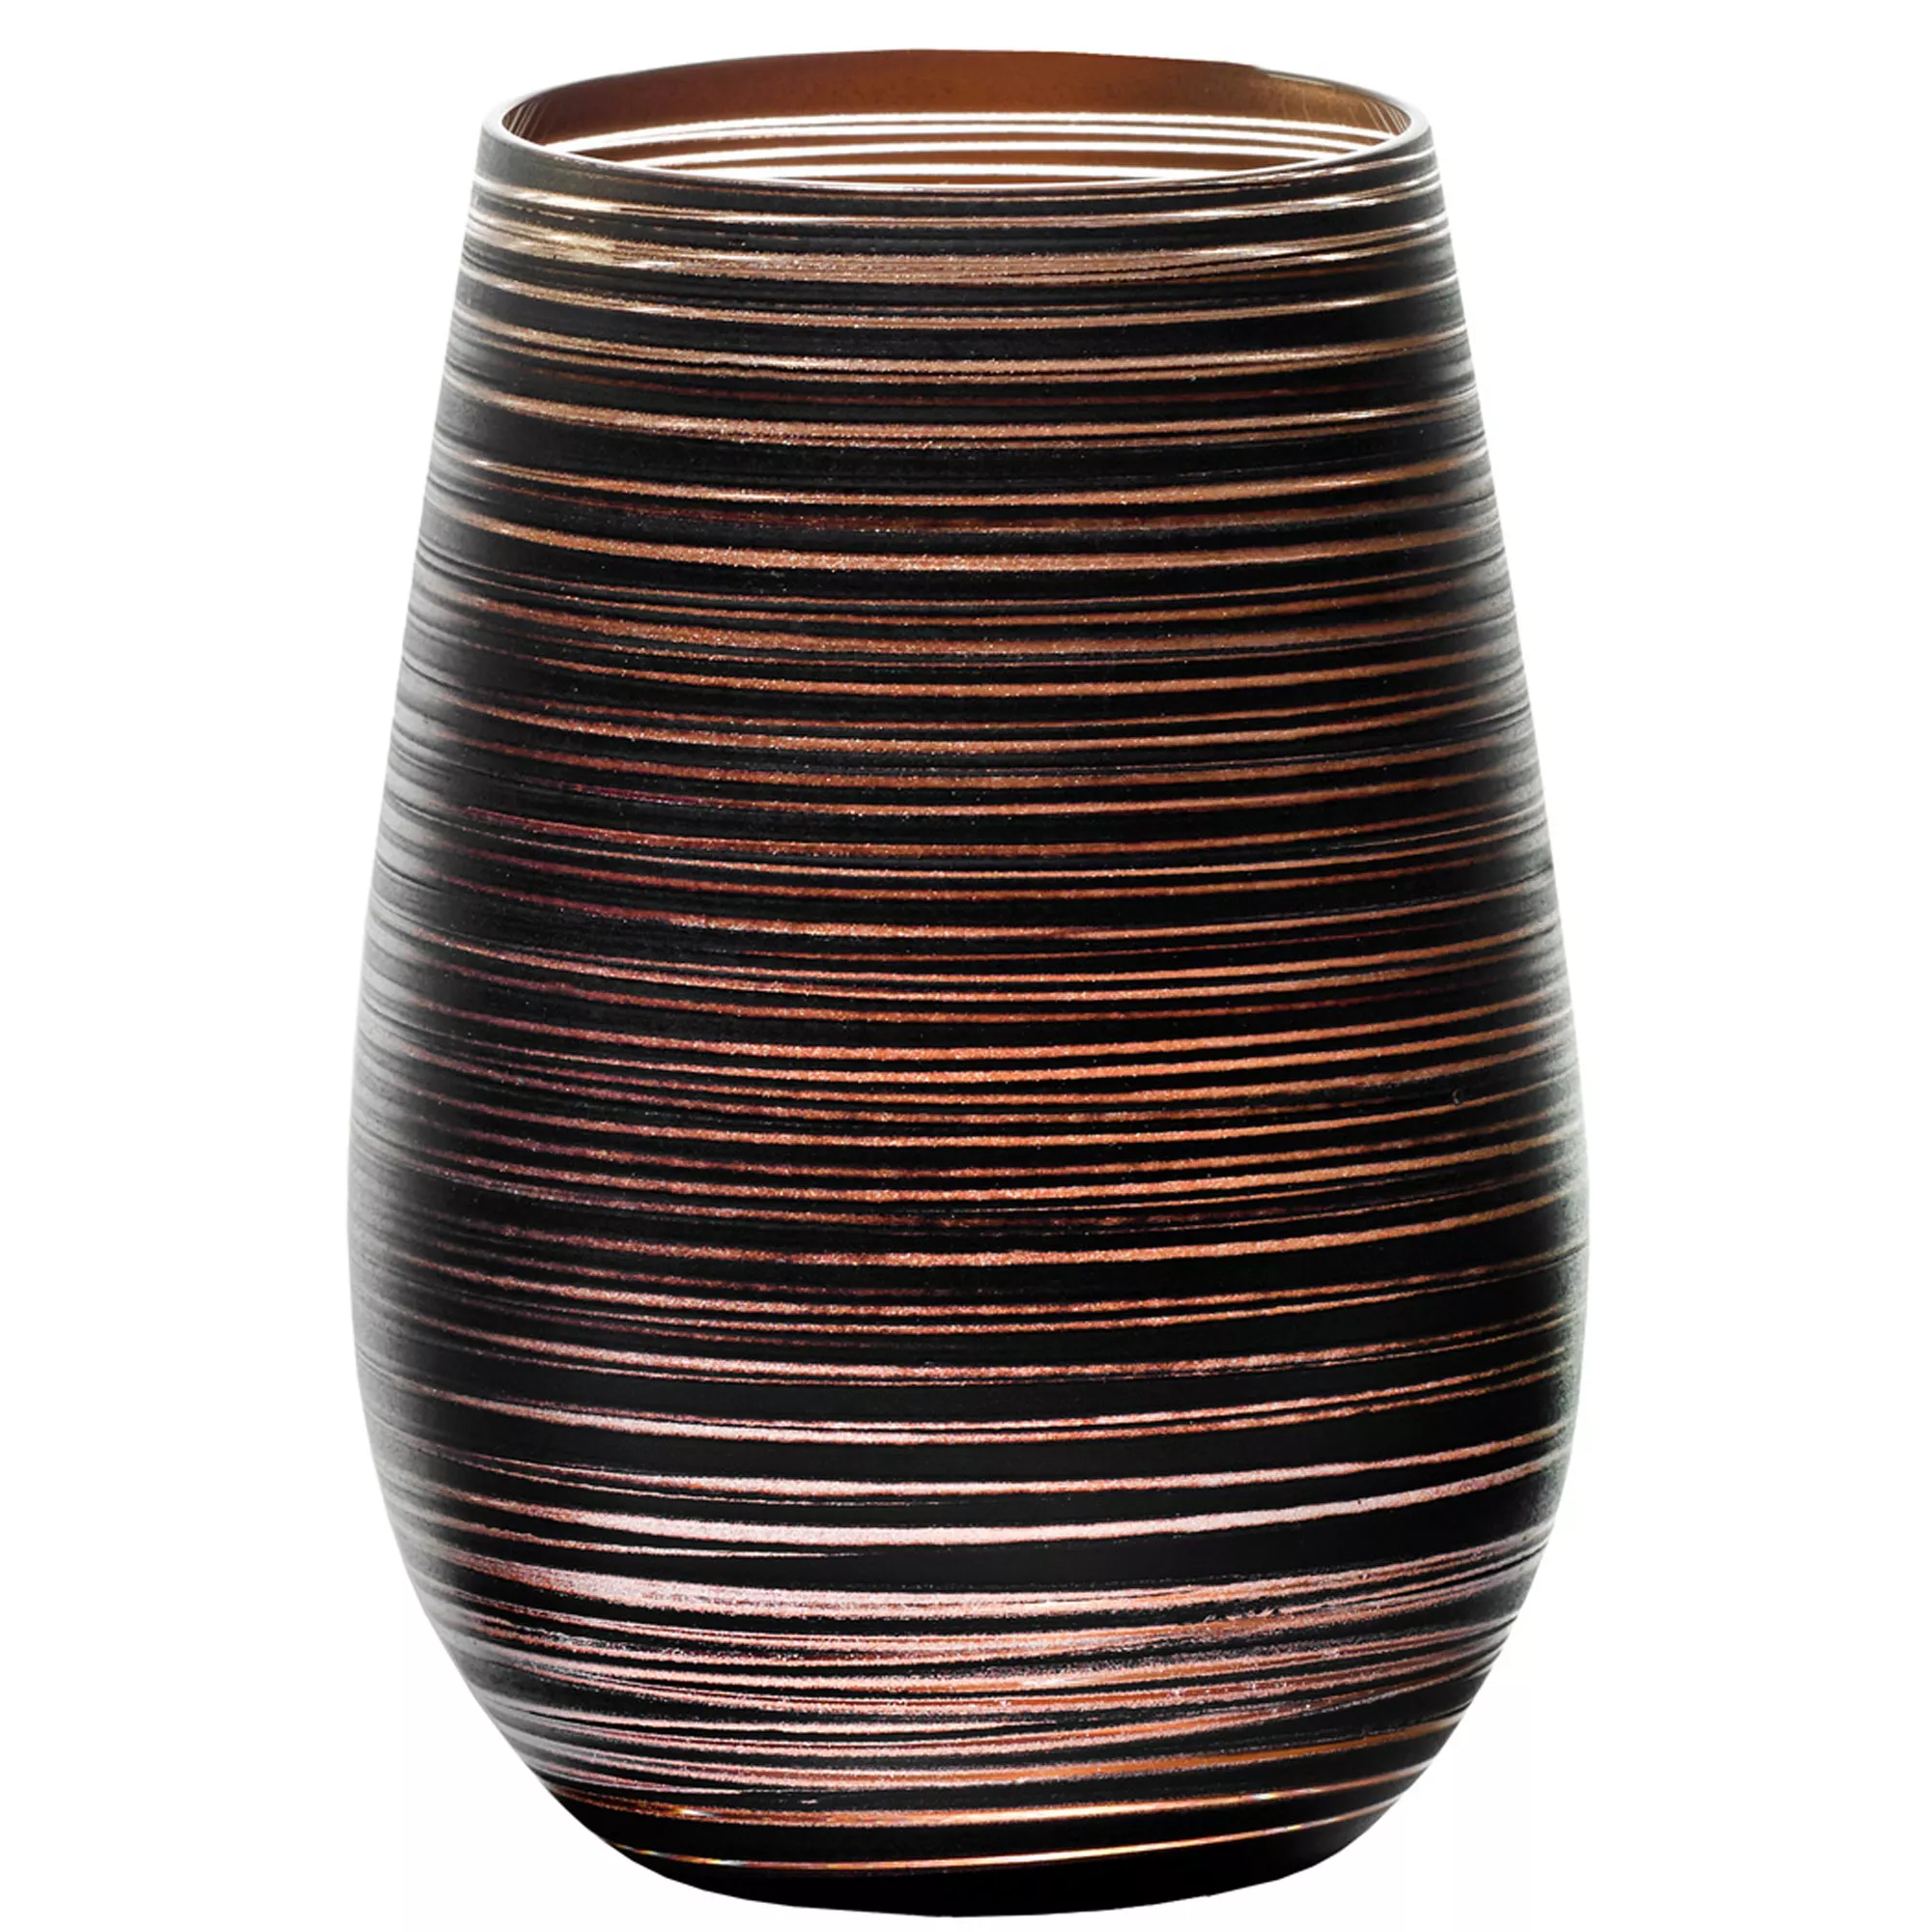 465ml black-bronze in series - Tumbler \'Twister\' from Stölzle the by (1